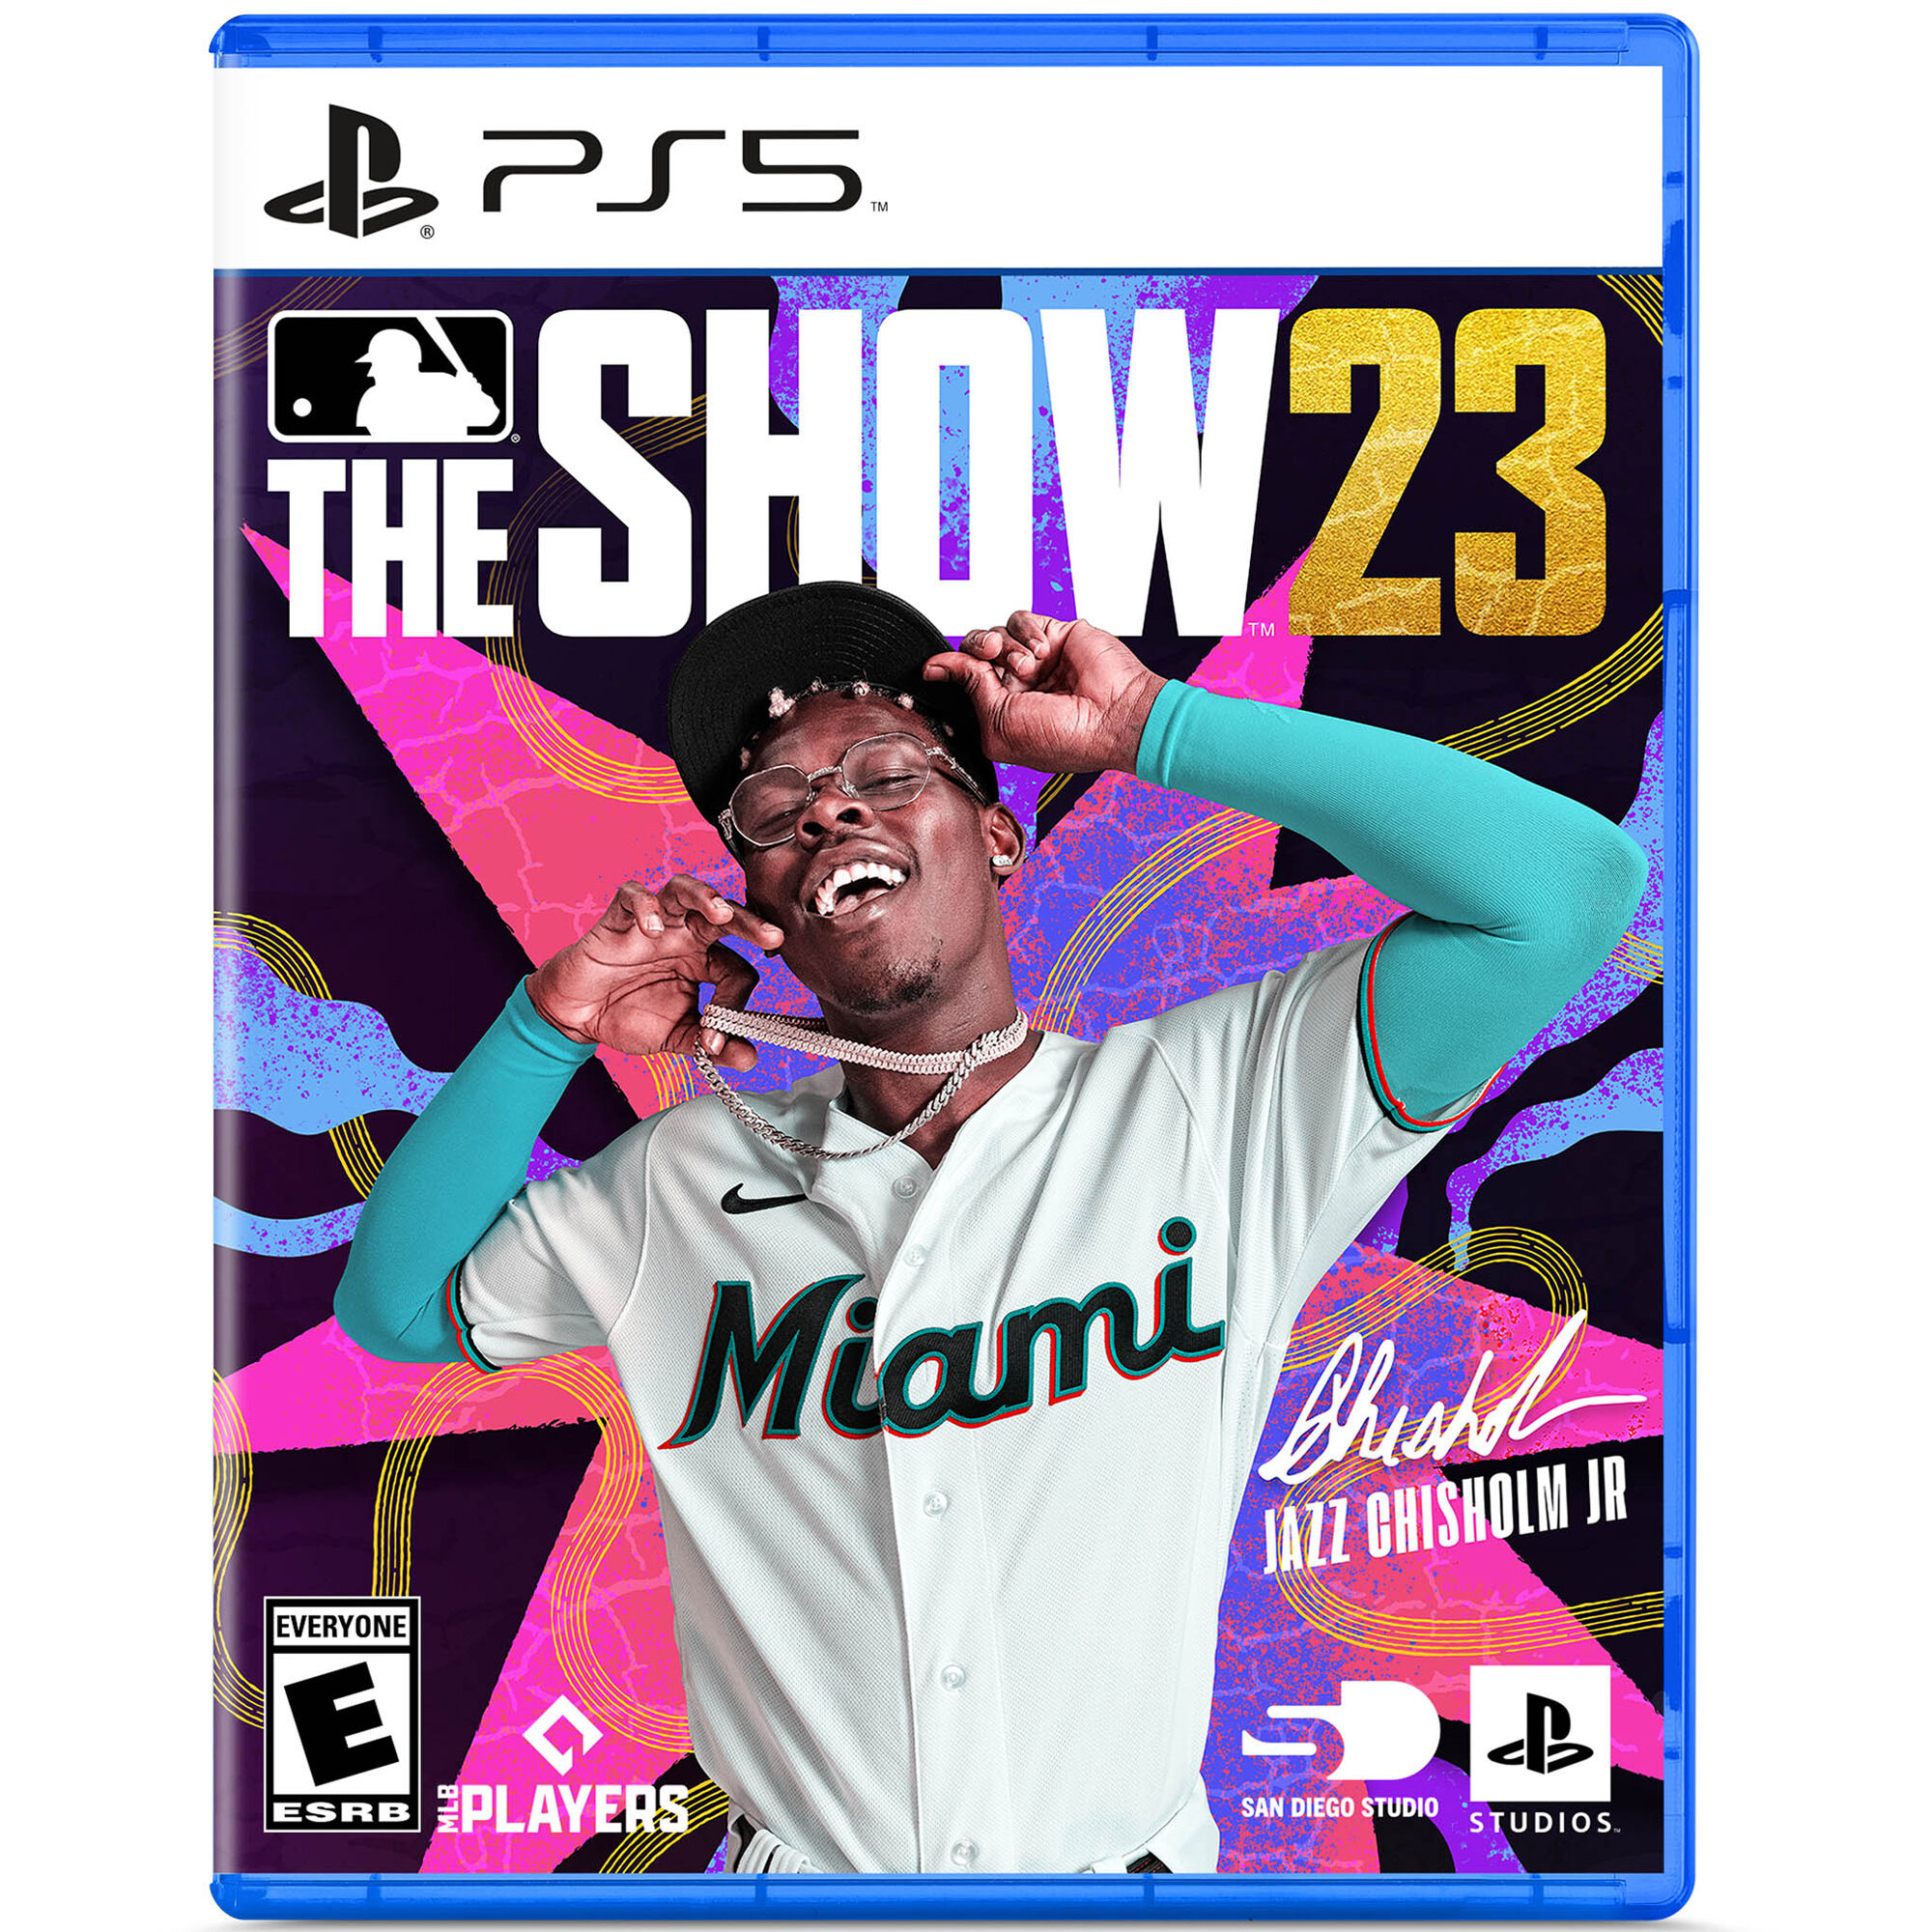 MLB The Show 23 Standard Edition for PS5 | P.C. Richard & Son